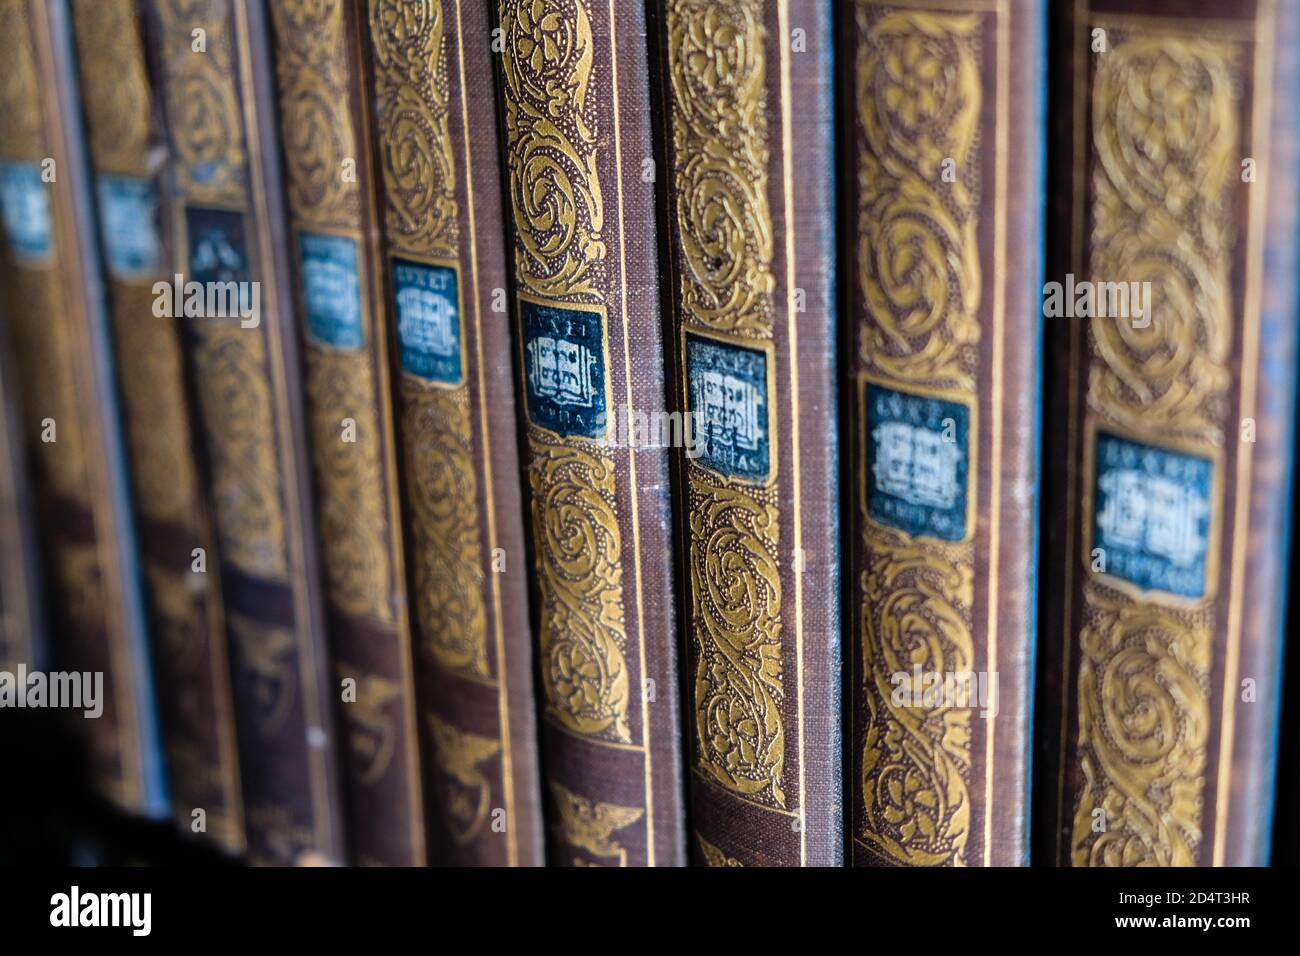 Row of old vintage books with brown and gold cover being sold on a Cuban garage sale outside Stock Photo